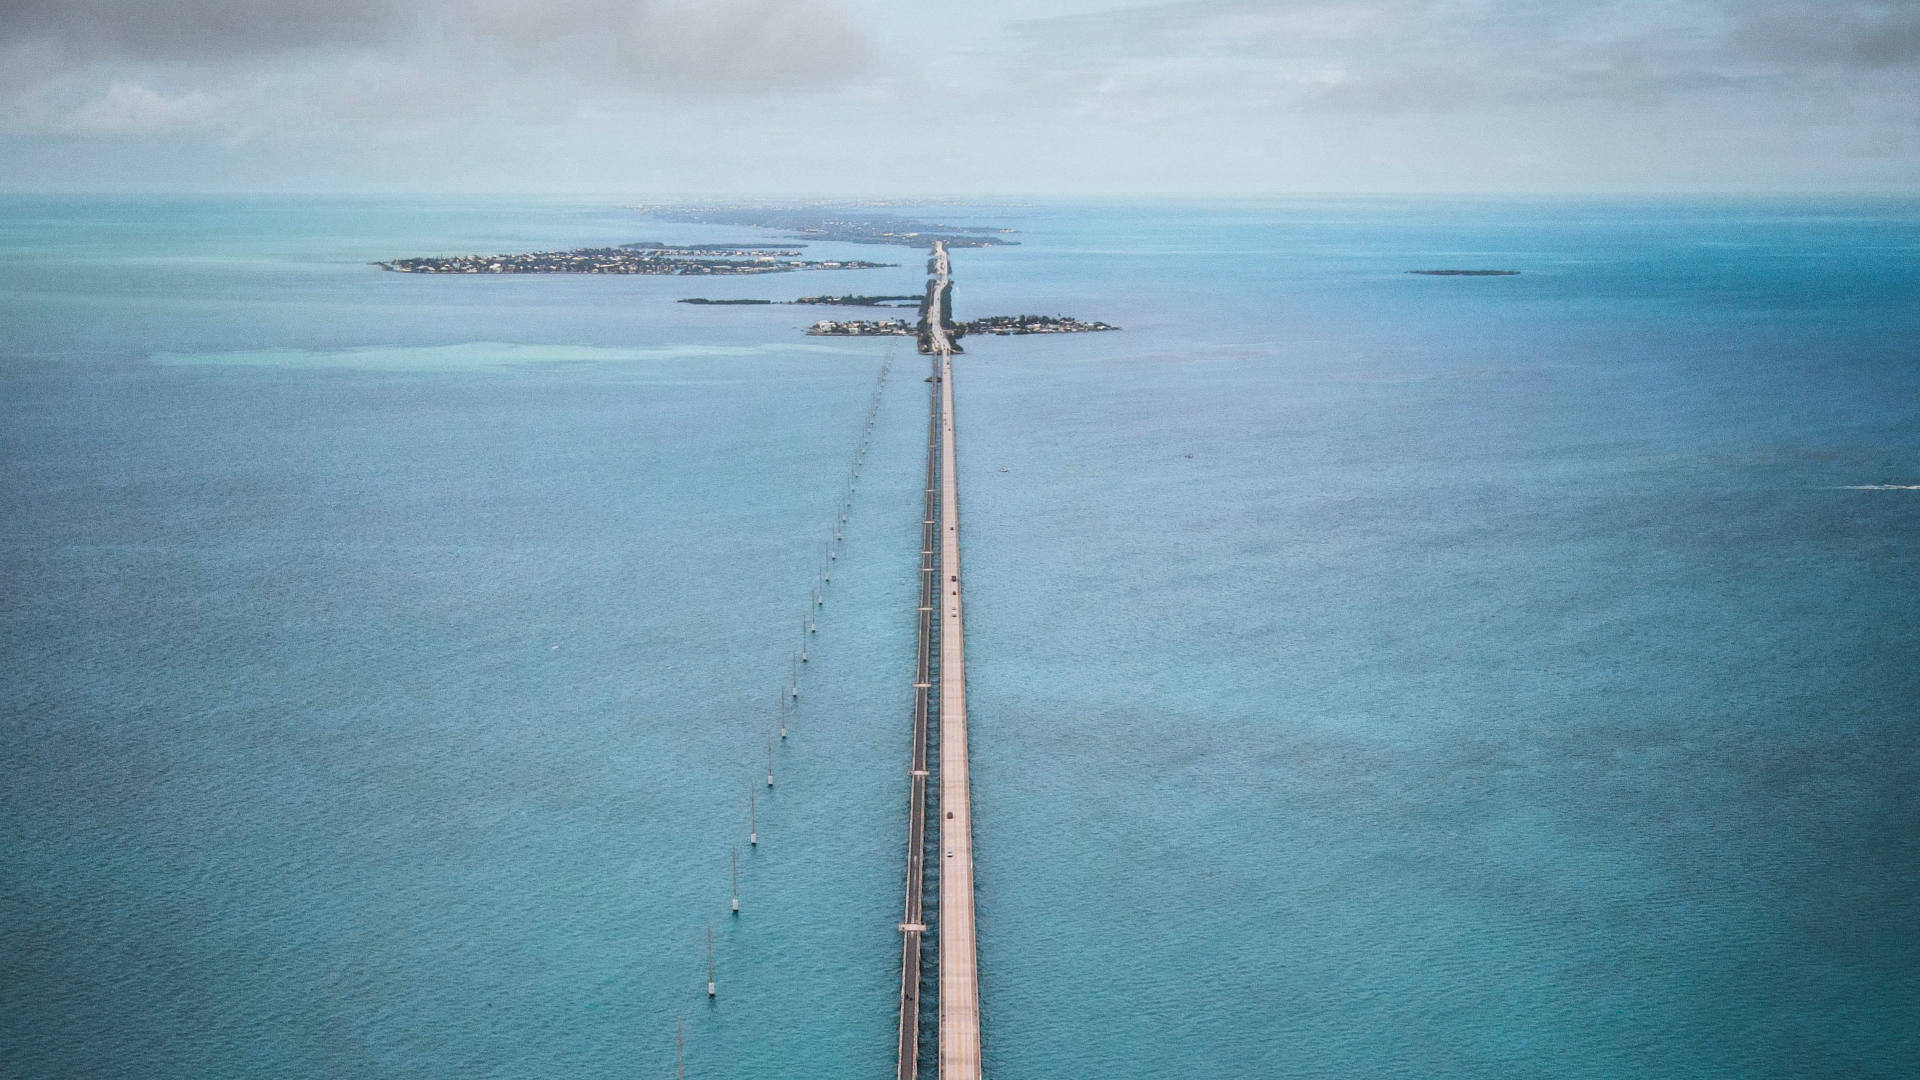 The Seven Mile Bridge is a part of the Overseas Highway connecting the string of islands that make up the Keys.